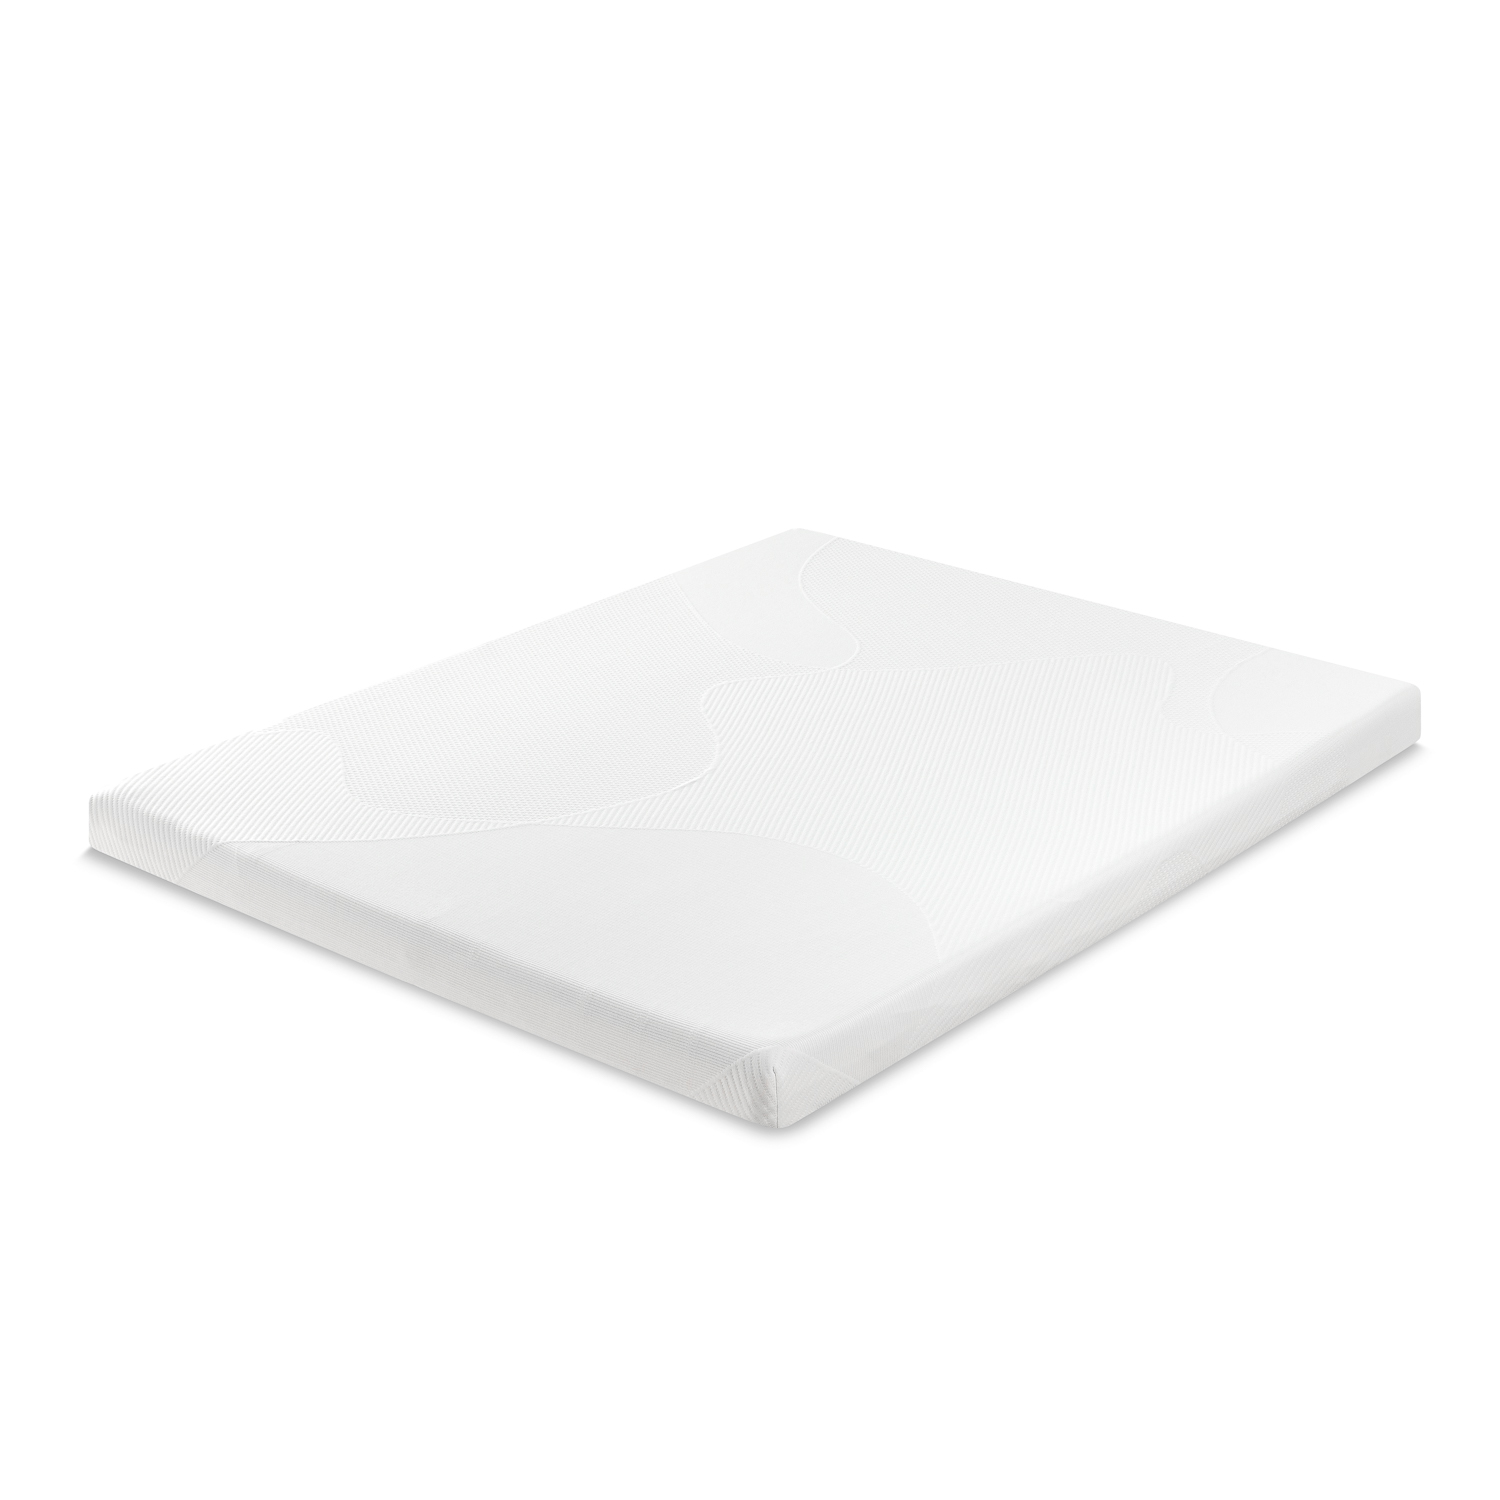 Spa Sensations By Zinus 4" Memory Foam Mattress Topper with Theratouch, Twin - image 4 of 10